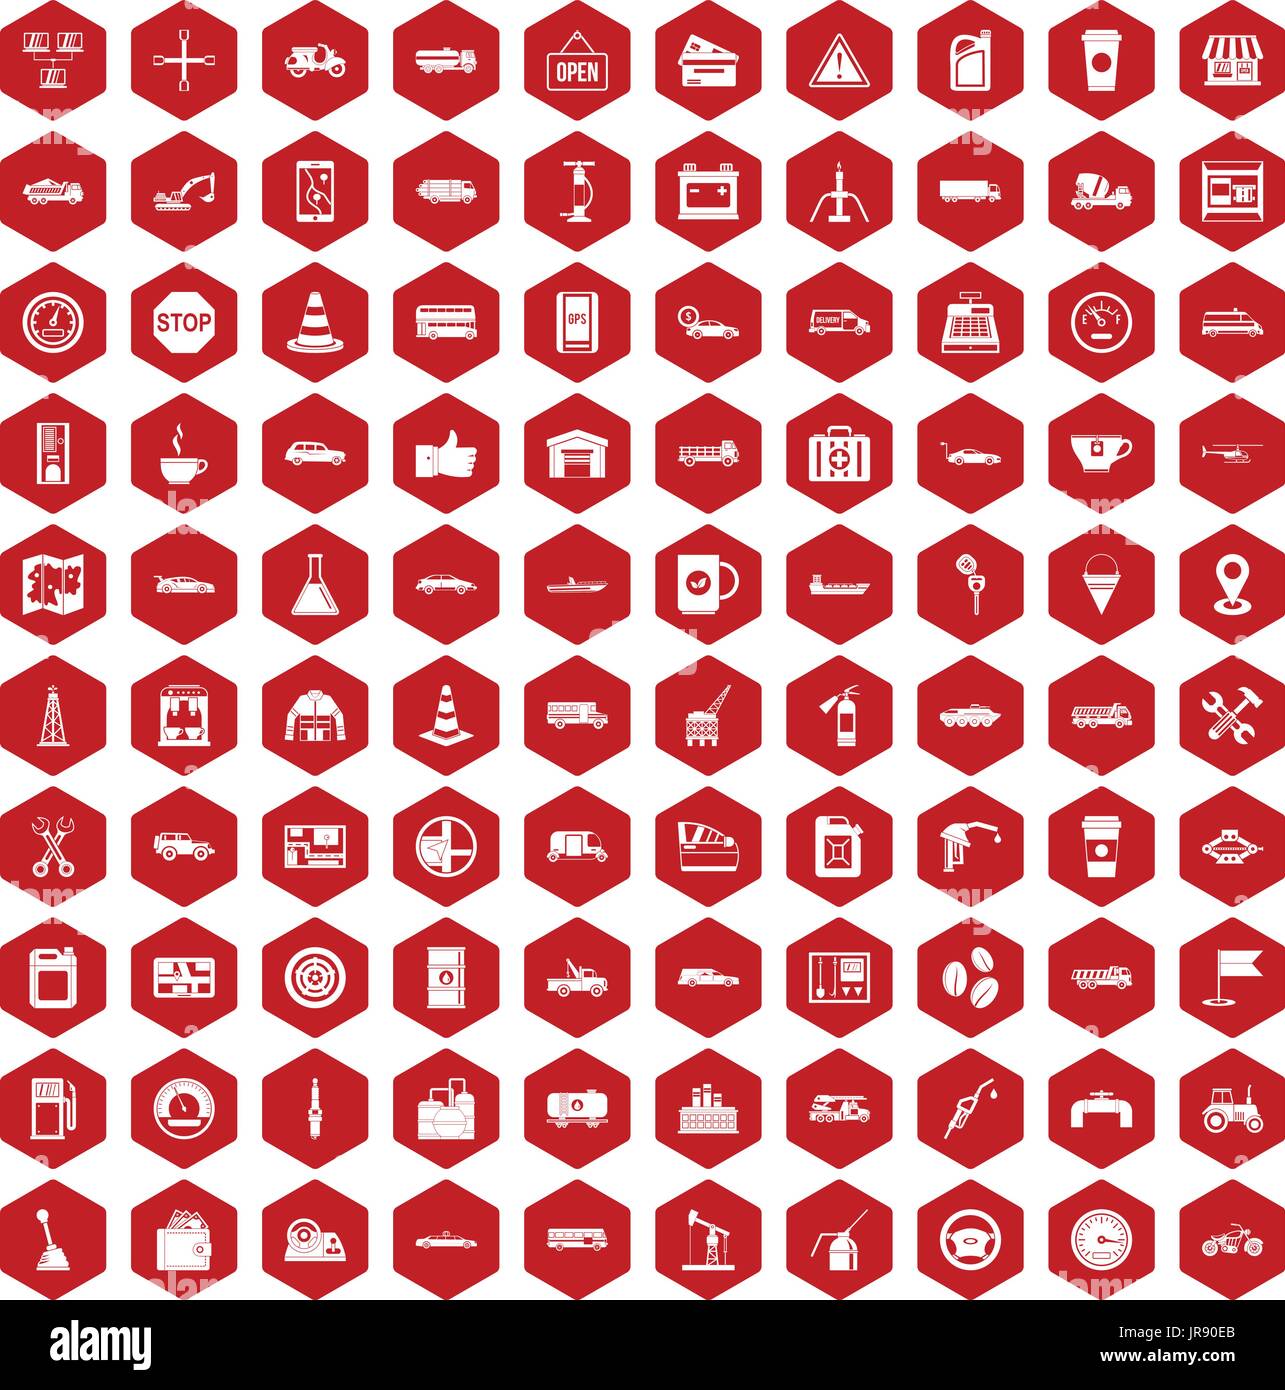 100 gas station icons hexagon red Stock Vector